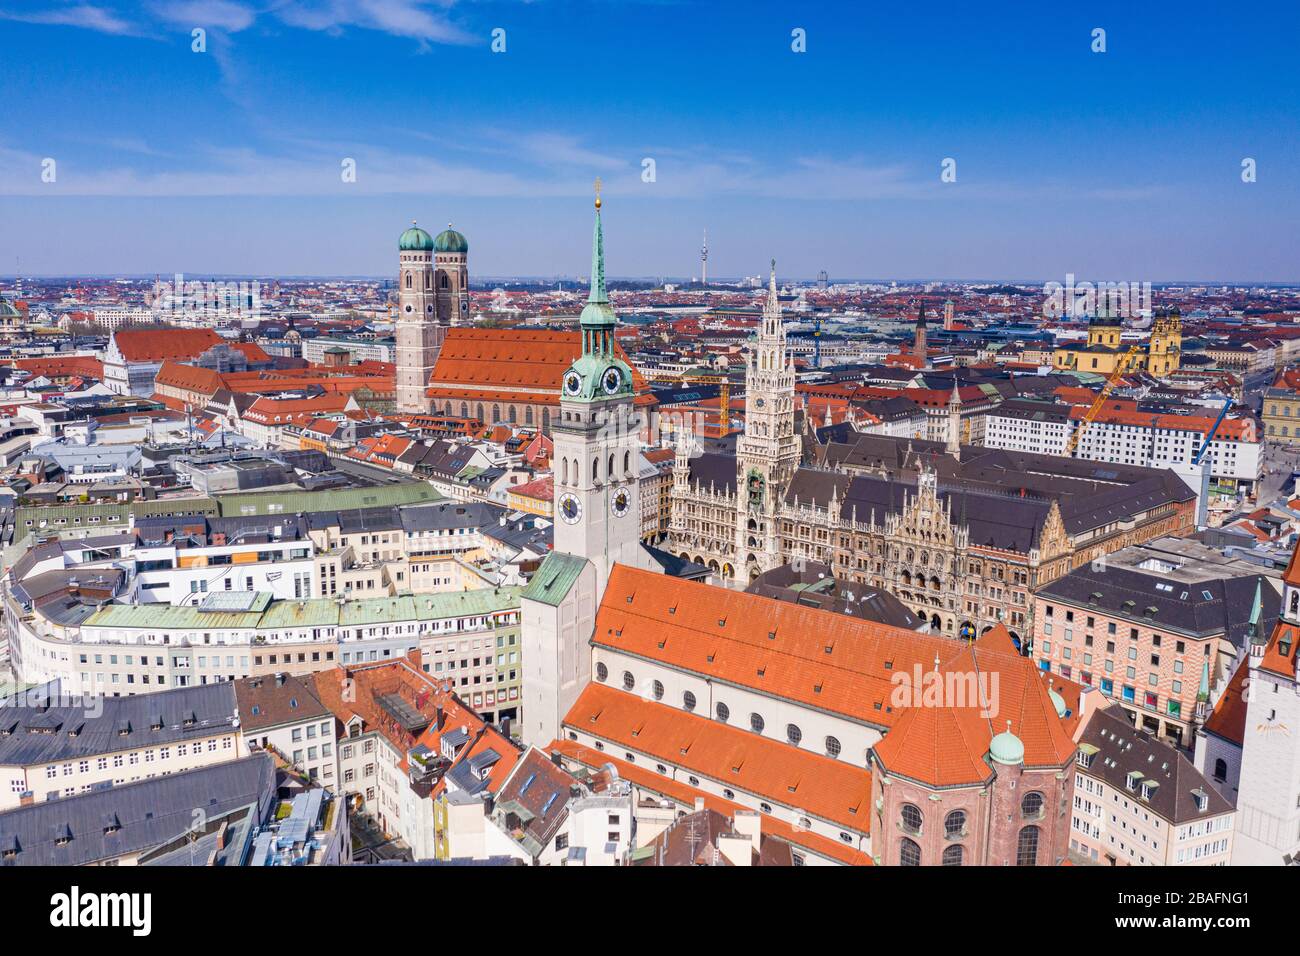 Aerial of the city center of Munich, Germany Stock Photo